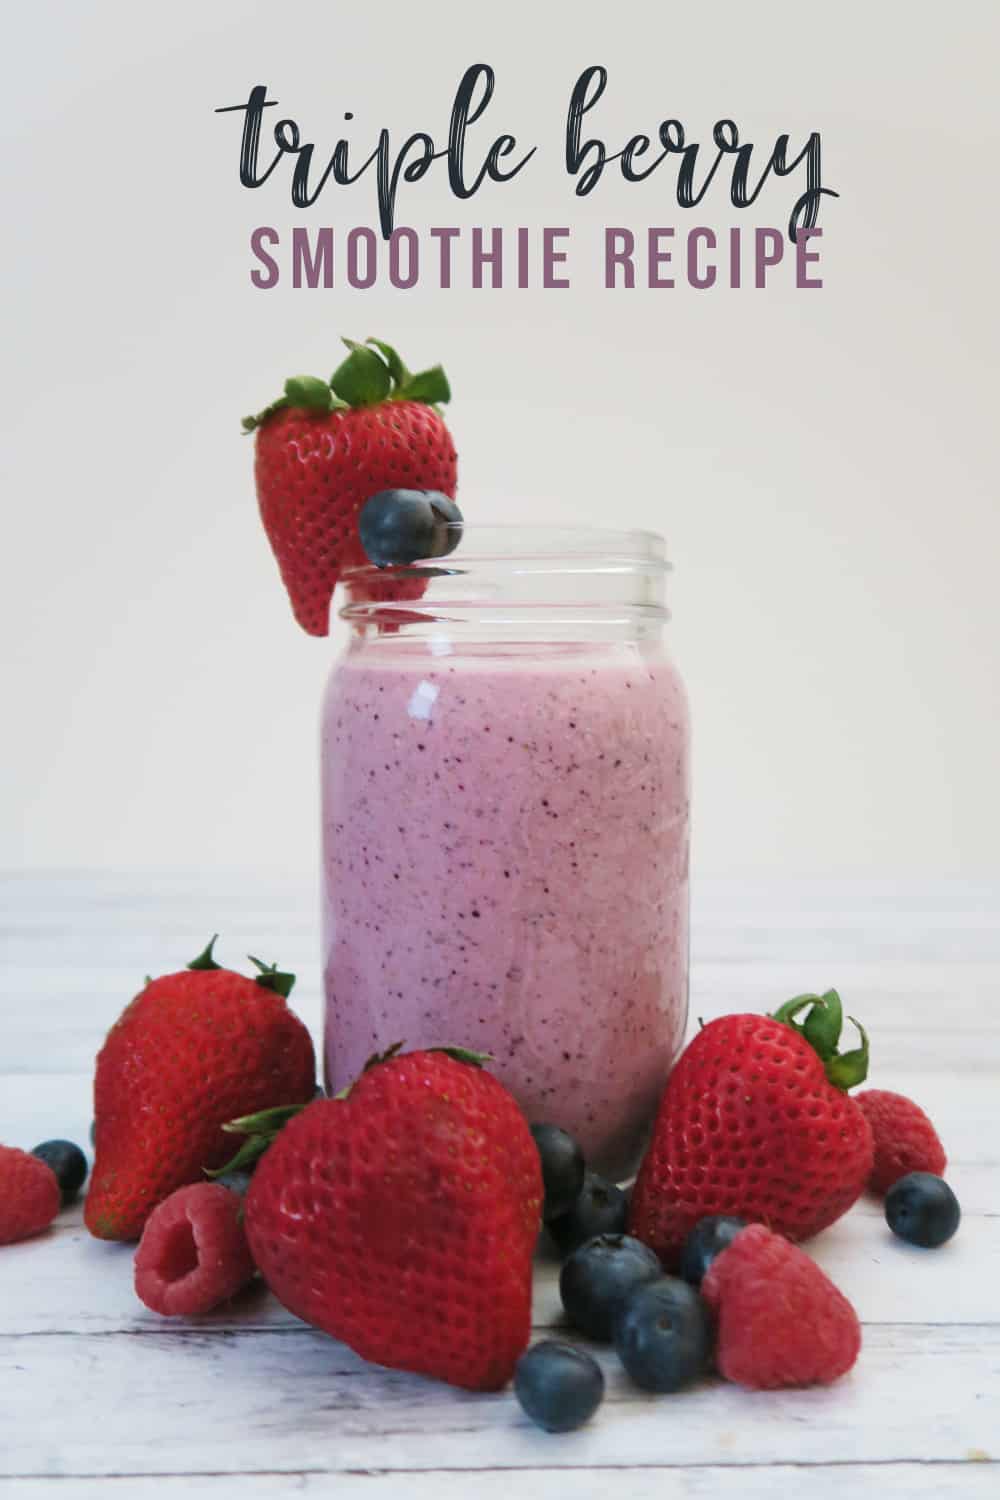 Looking for a healthy berry smoothie recipe with almond milk? I've got you covered with one of my favorite smoothie recipes with greek yogurt and chia seeds! This triple berry blend smoothie recipe will be your new favorite breakfast for you and your kids! #BerrySmoothie #Smoothe #SmoothieRecipe #BreakfastSmoothie #BreakfastRecipe #HealthyEating